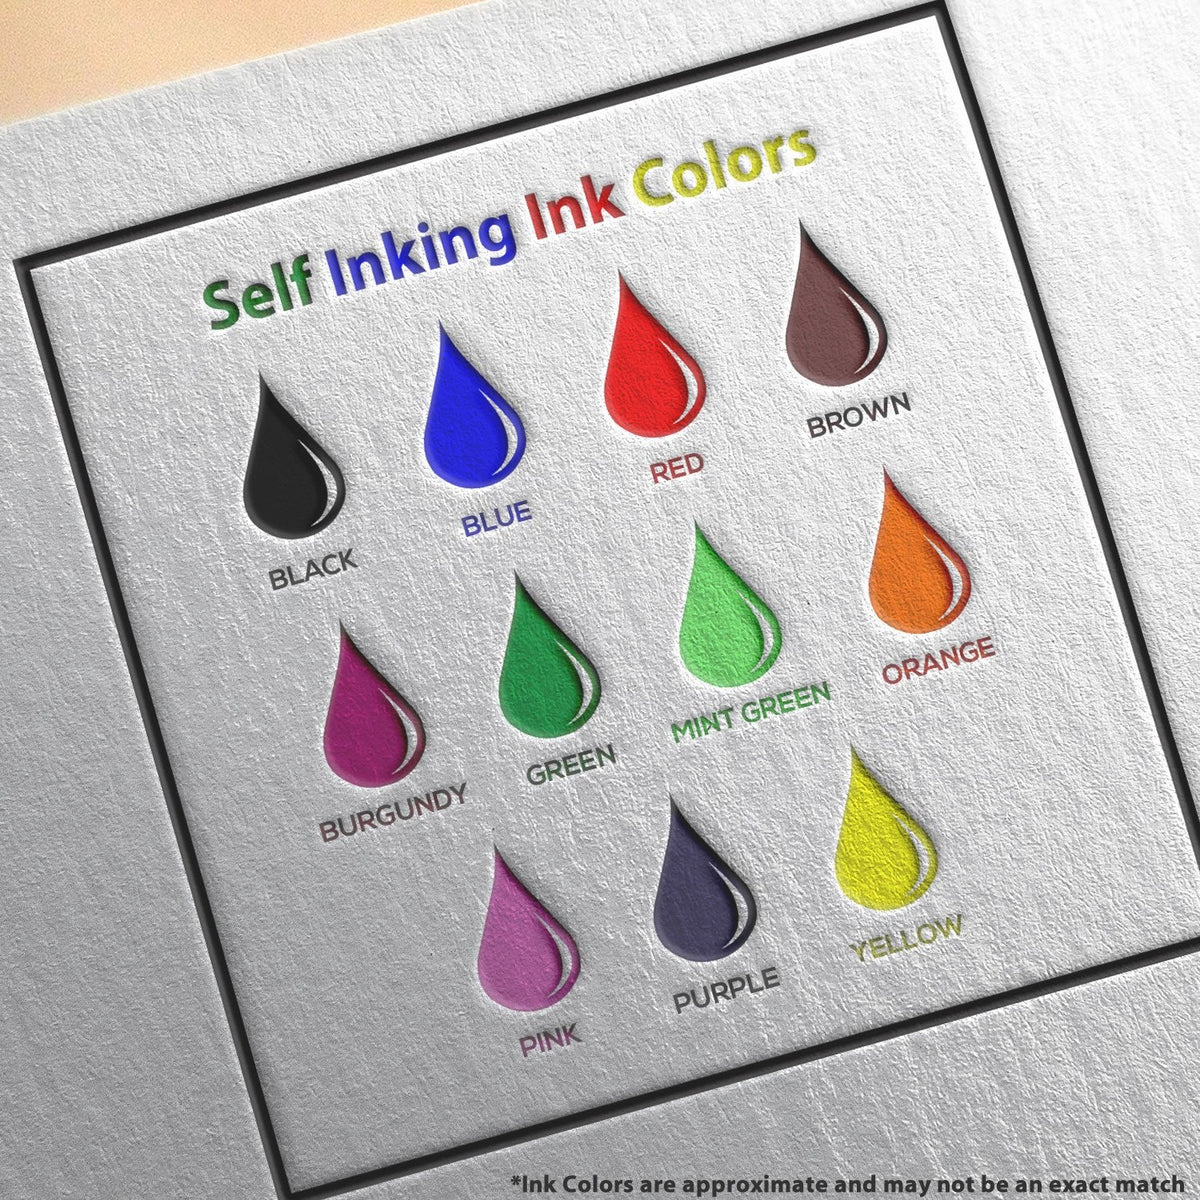 Self-Inking Outline Approved Stamp Ink Color Options